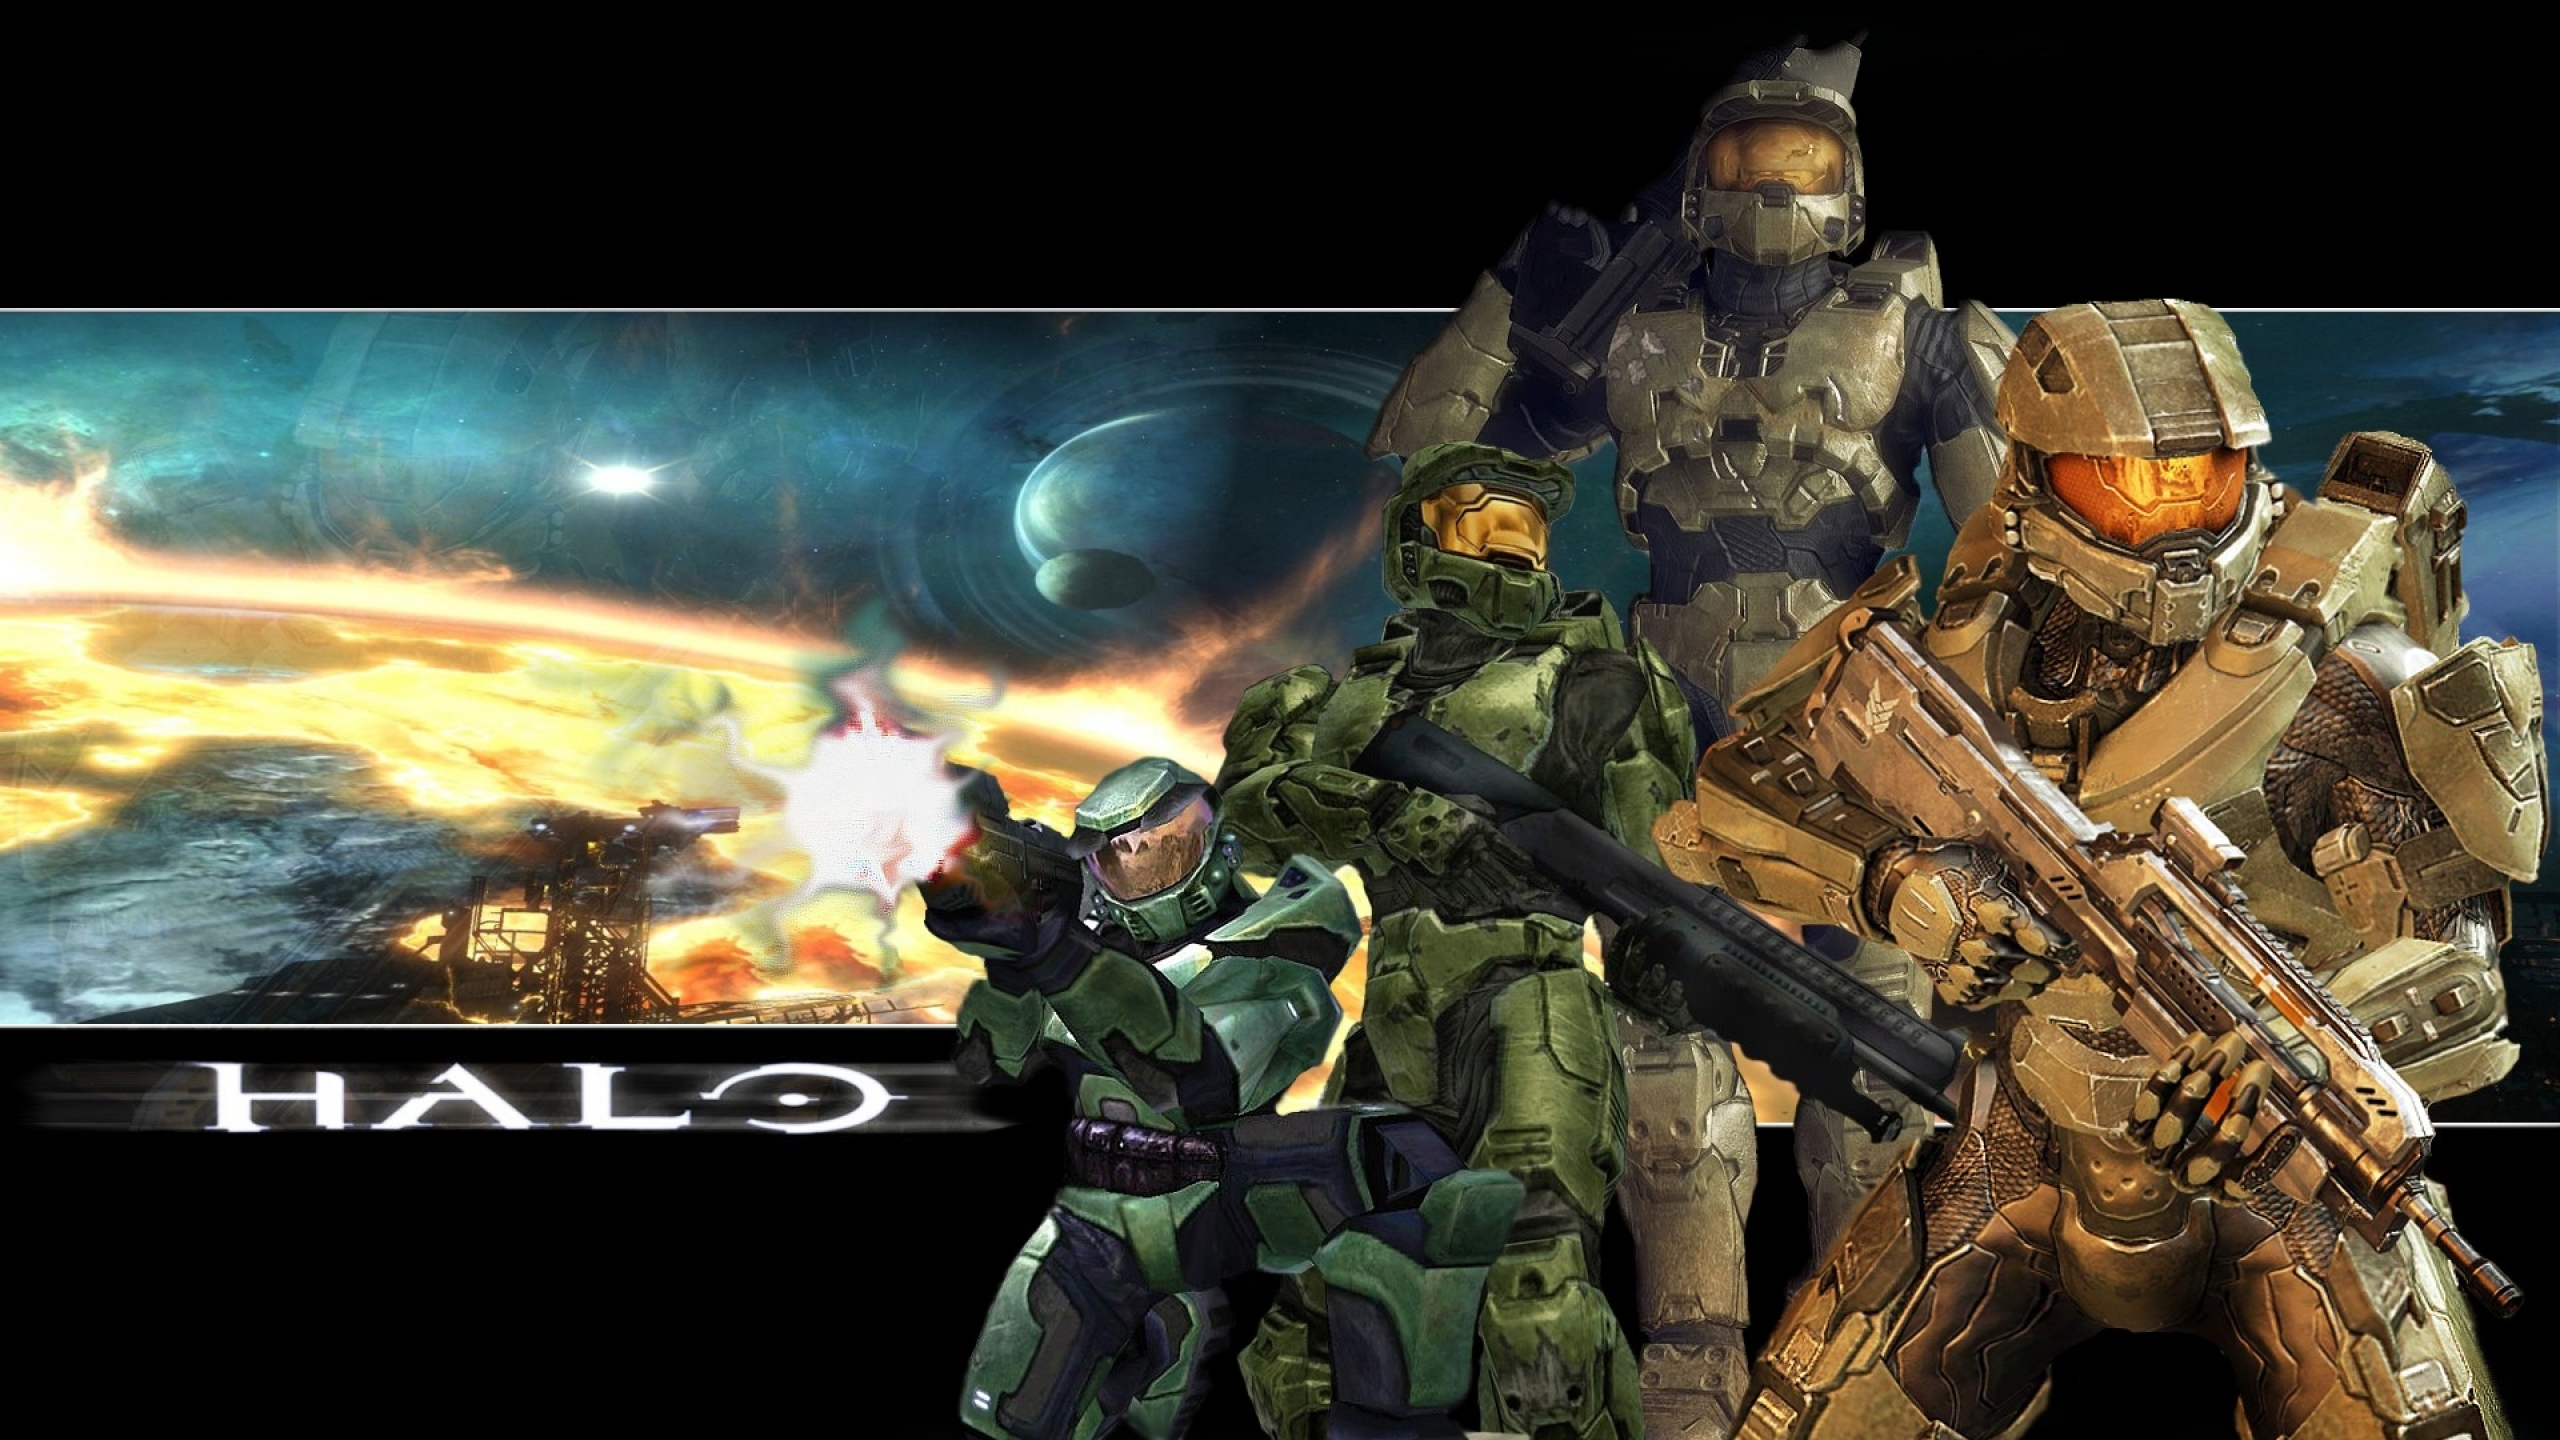 Halo Games Wallpaper High Quality